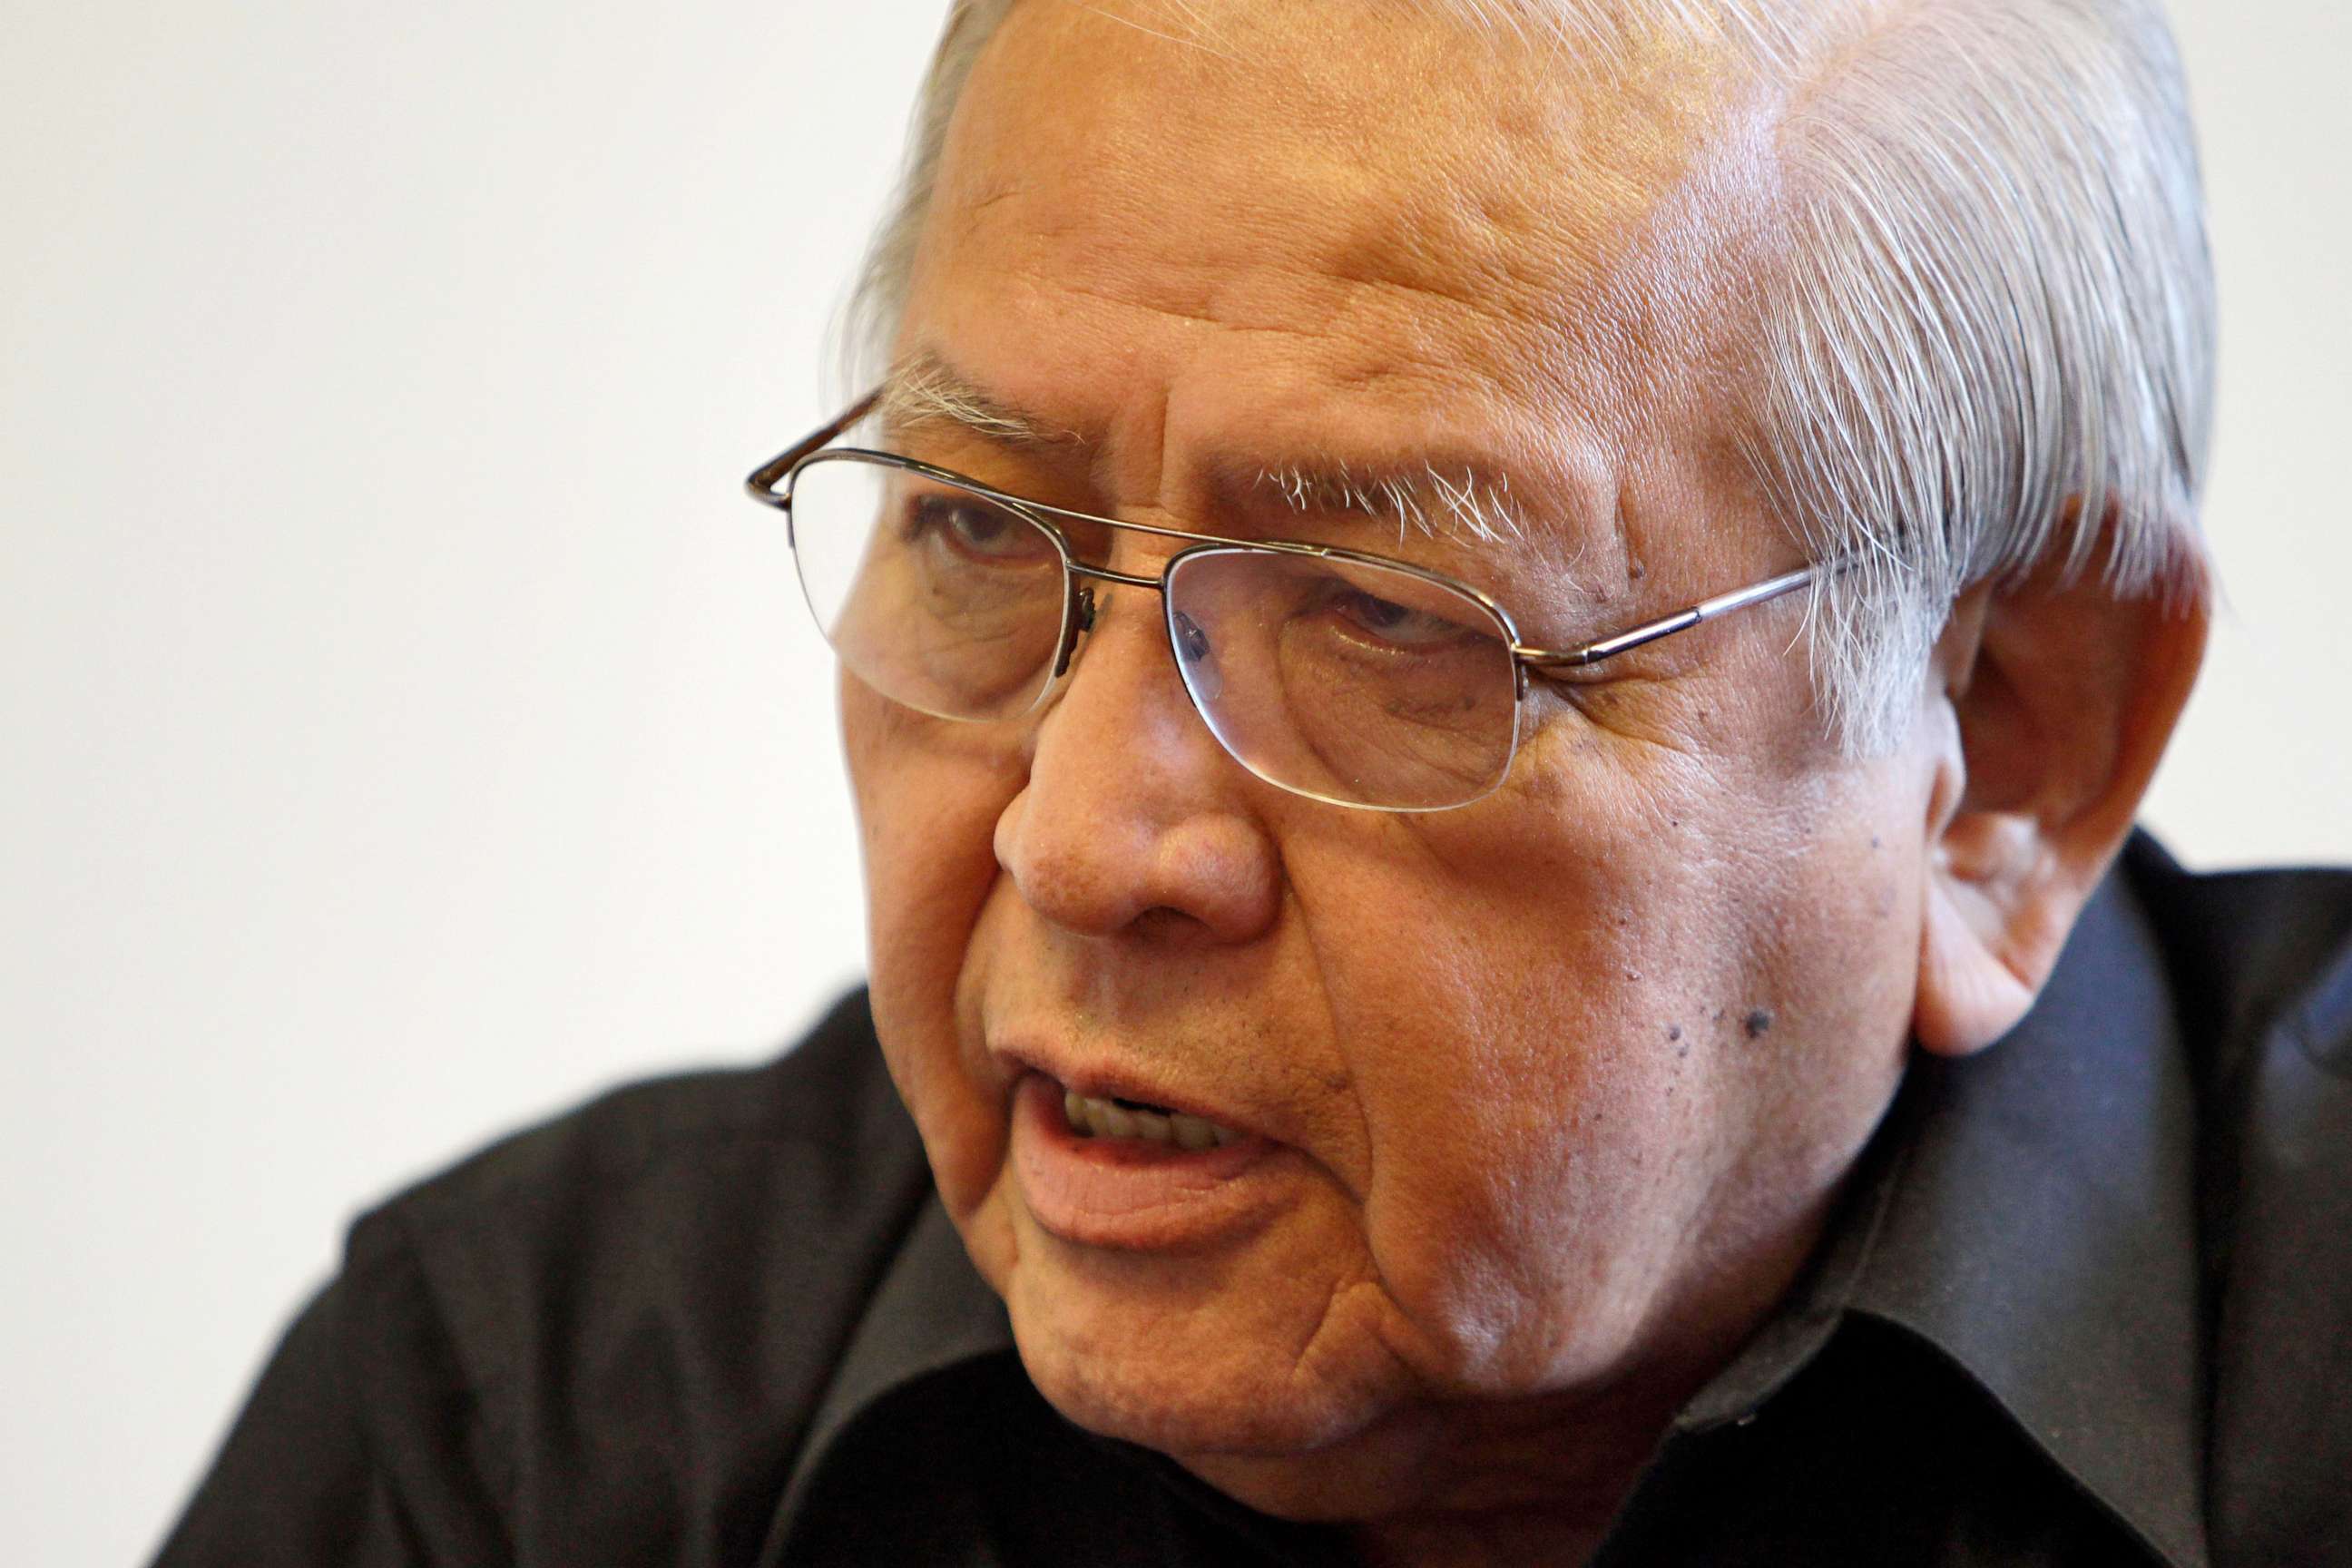 PHOTO: Former Navajo Chairman Peterson Zah speaks from his office on Nov. 15, 2010 at Arizona State University in Tempe, Ariz.